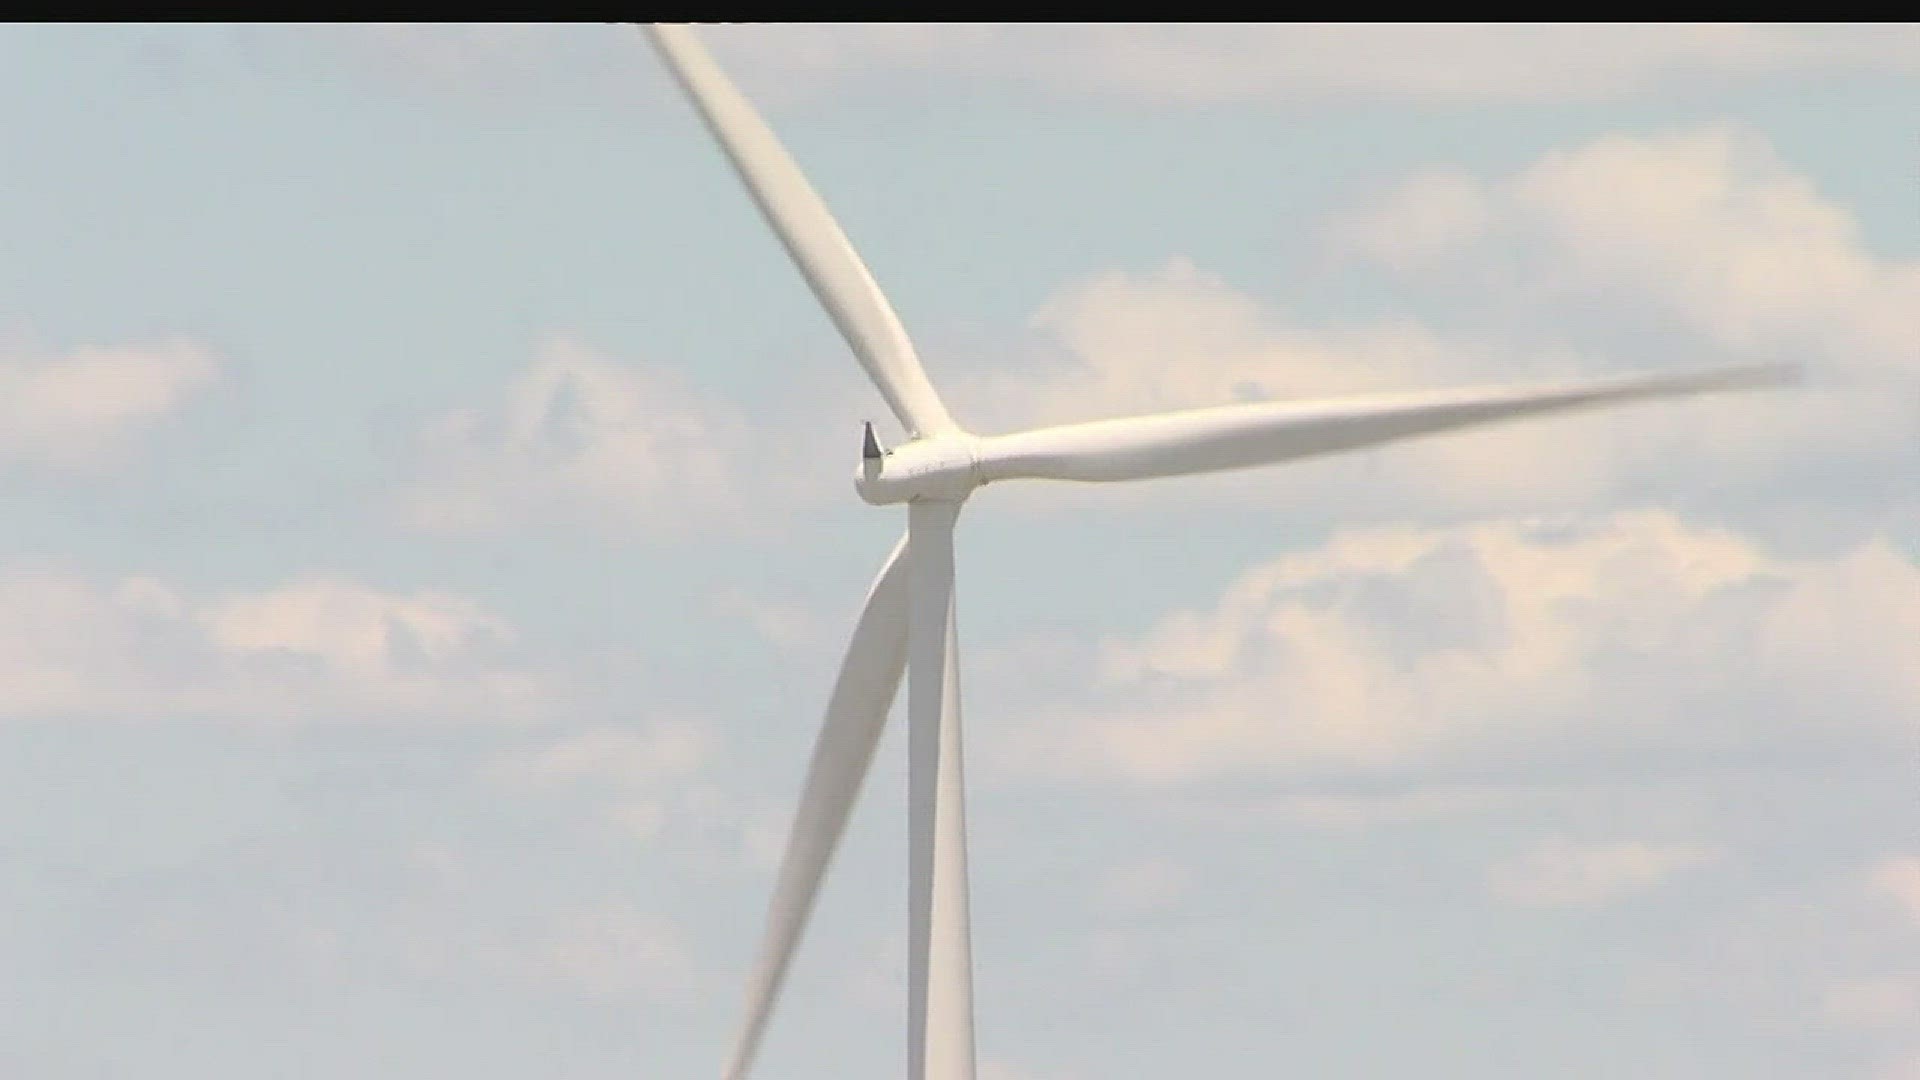 A southside windfarm at the center of a debate about what may jeopardize training for U.S. Navy pilots is getting ready to go online later this month.